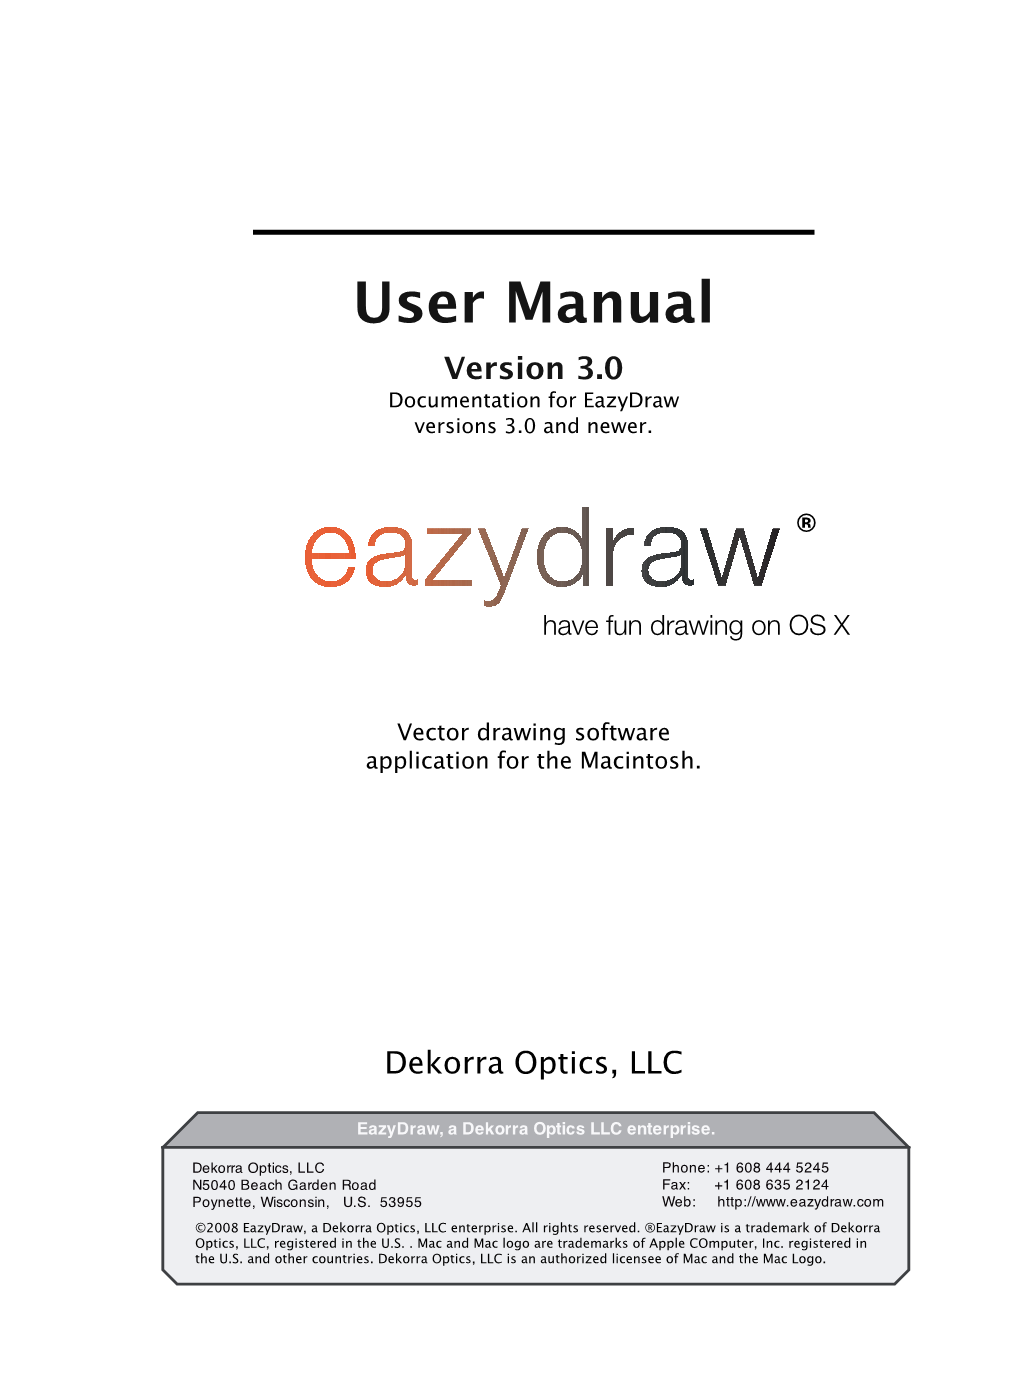 User Manual Version 3.0 Documentation for Eazydraw Versions 3.0 and Newer